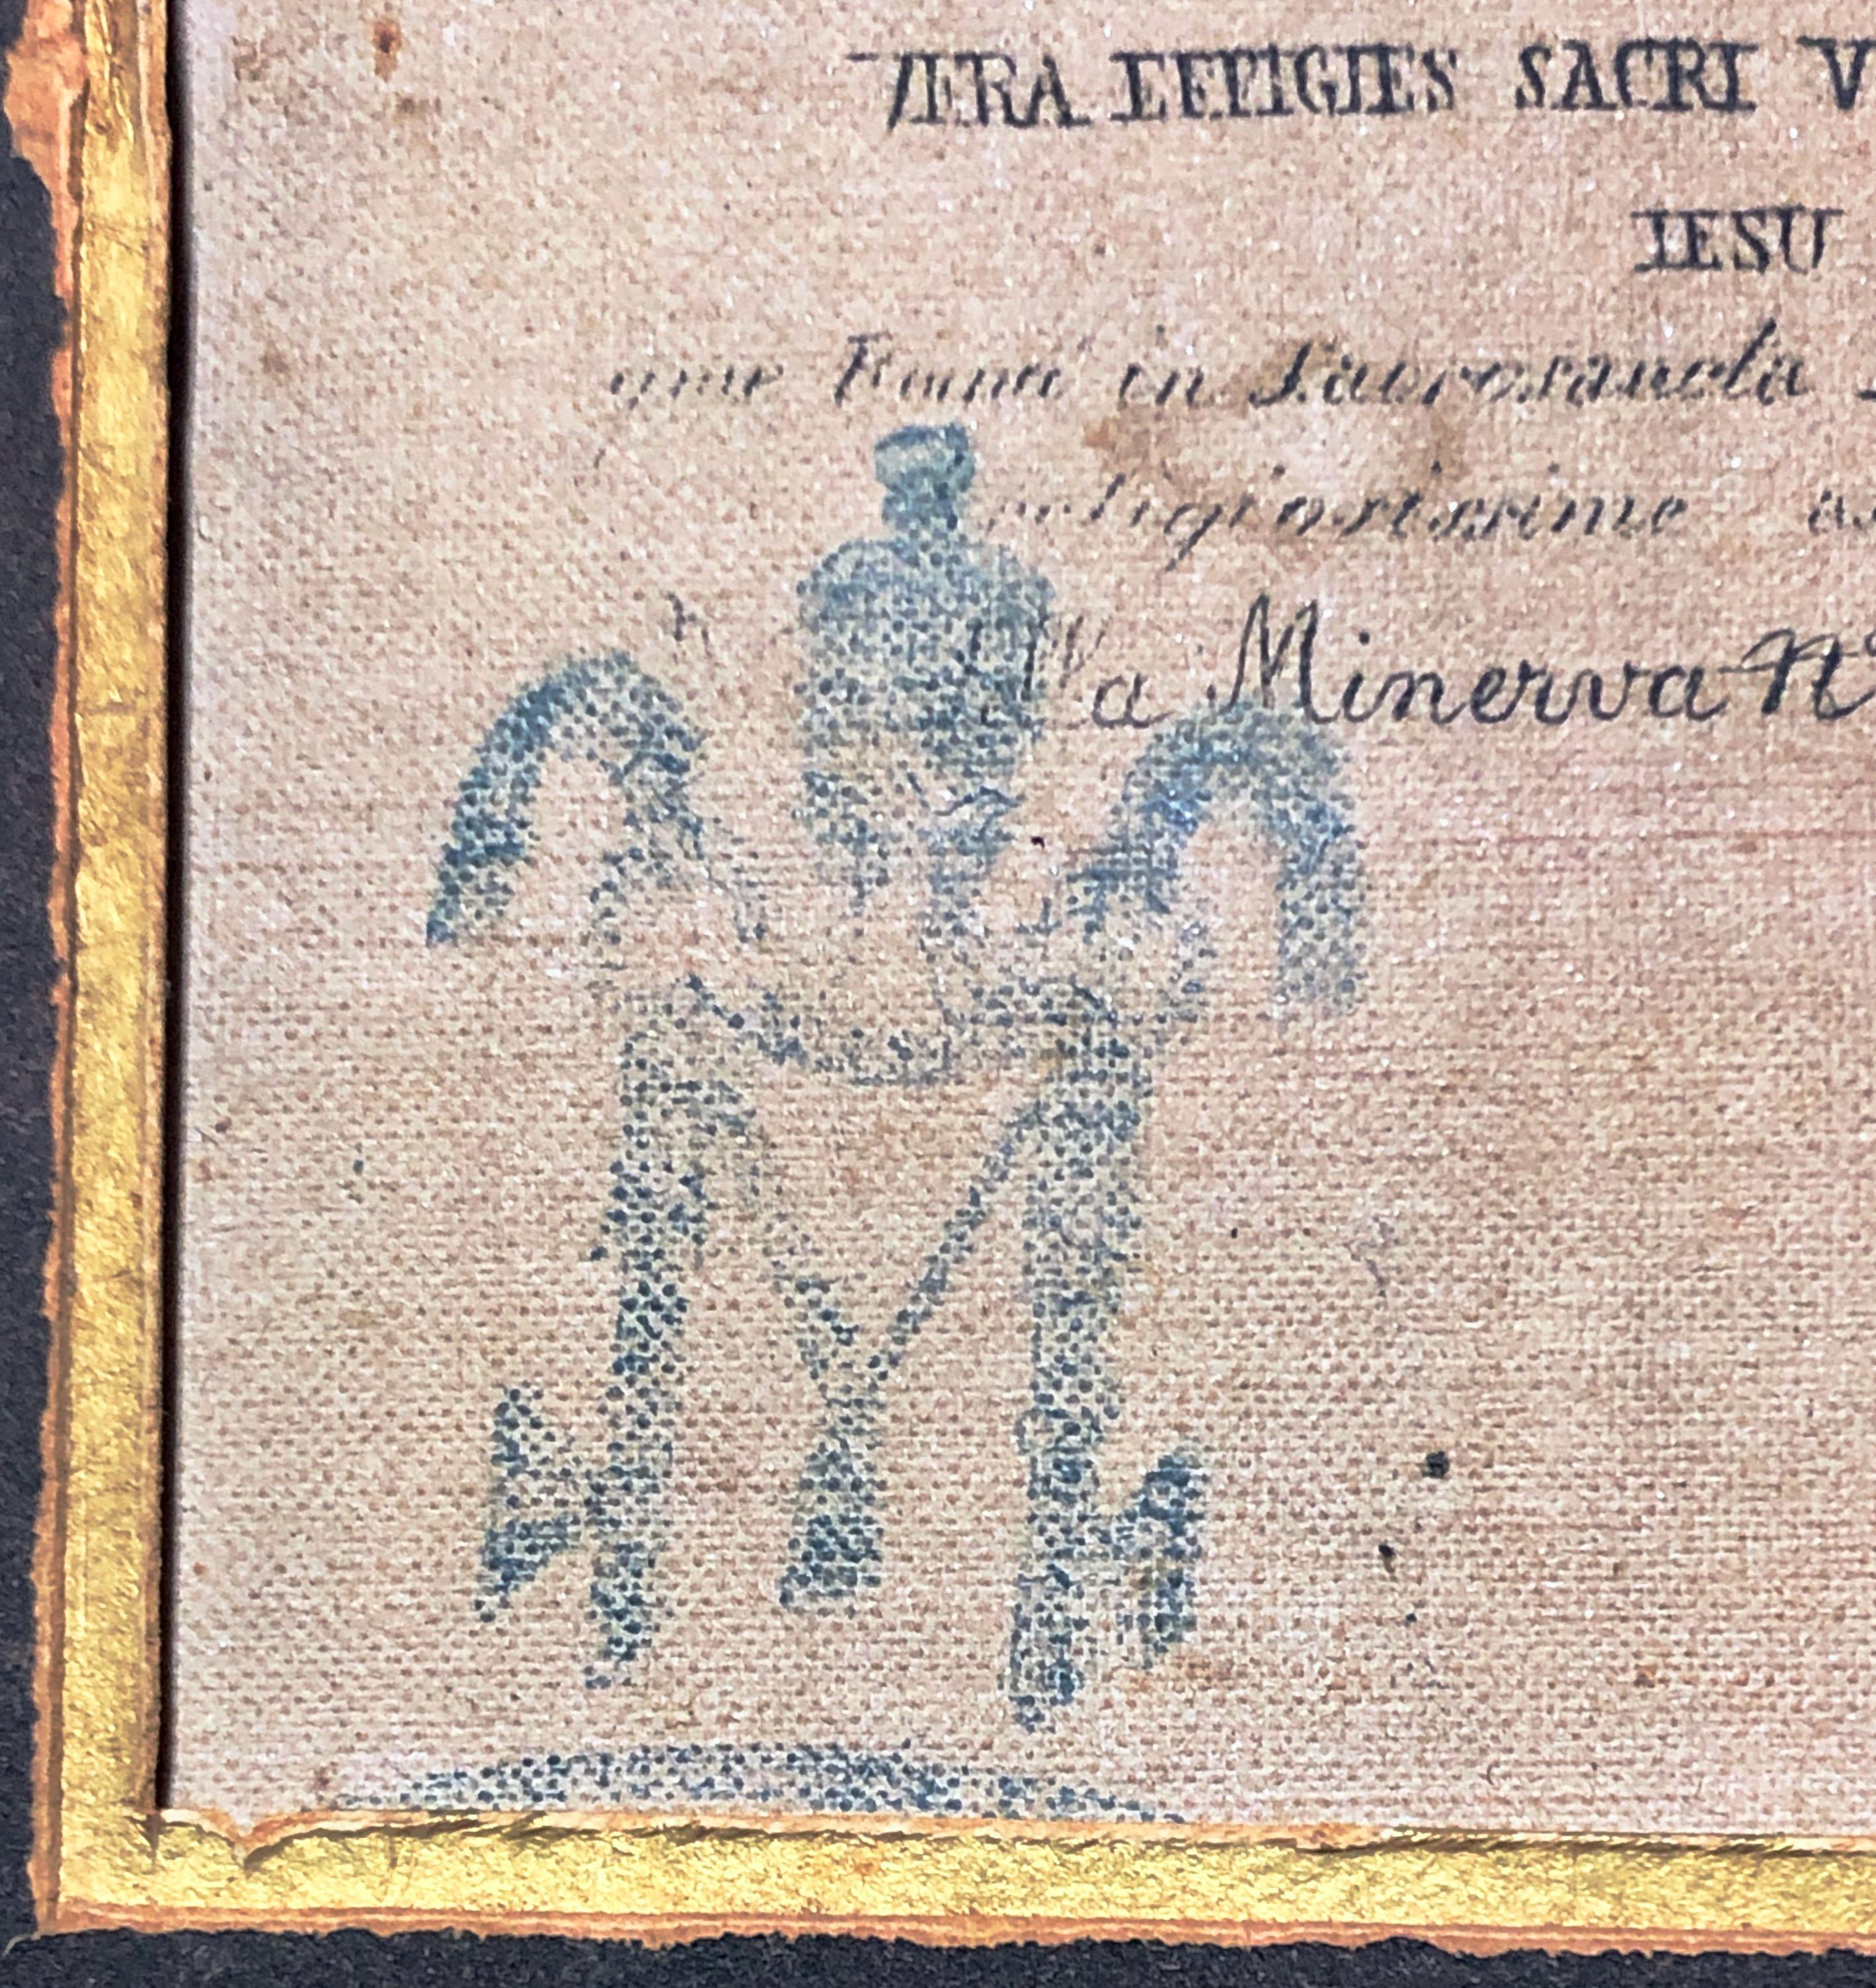 Late 19th Century Framed Relic Image of Veronica's Veil, with Vatican Seal and Stamp, Verso